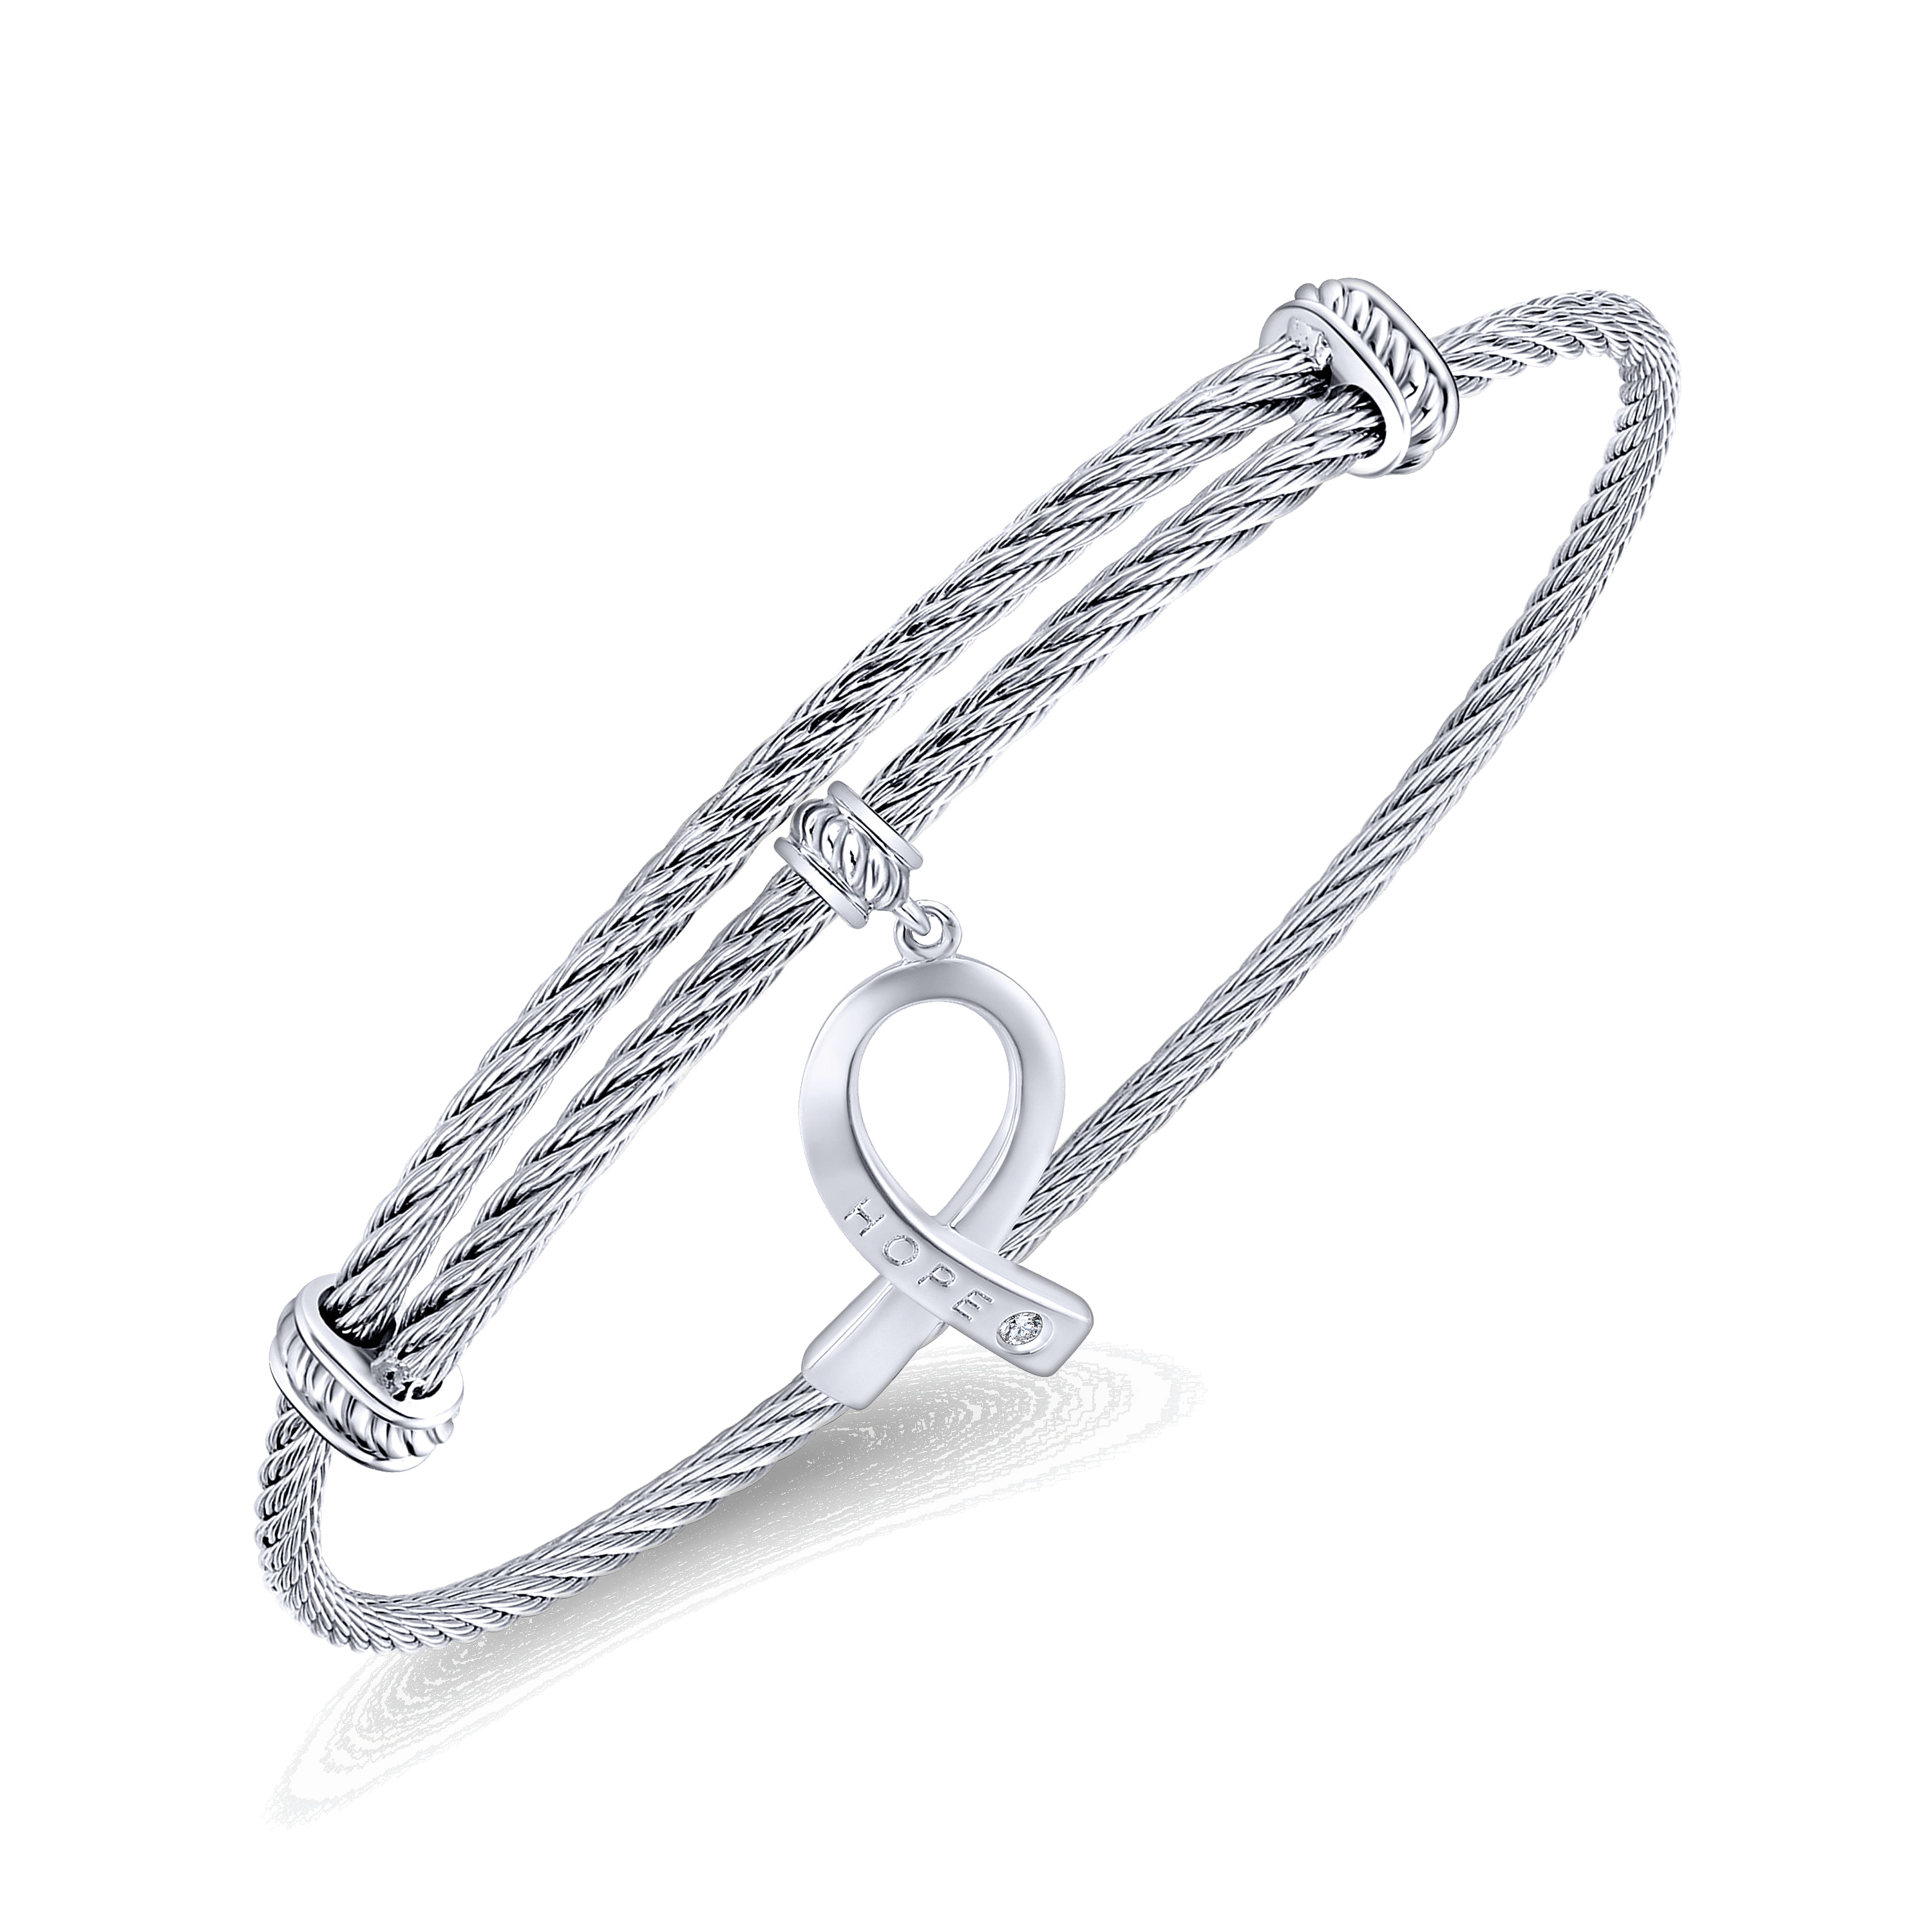 Stainless Steel Twisted Cable Bangle with Silver and White Sapphire HOPE Breast Cancer Awareness Charm